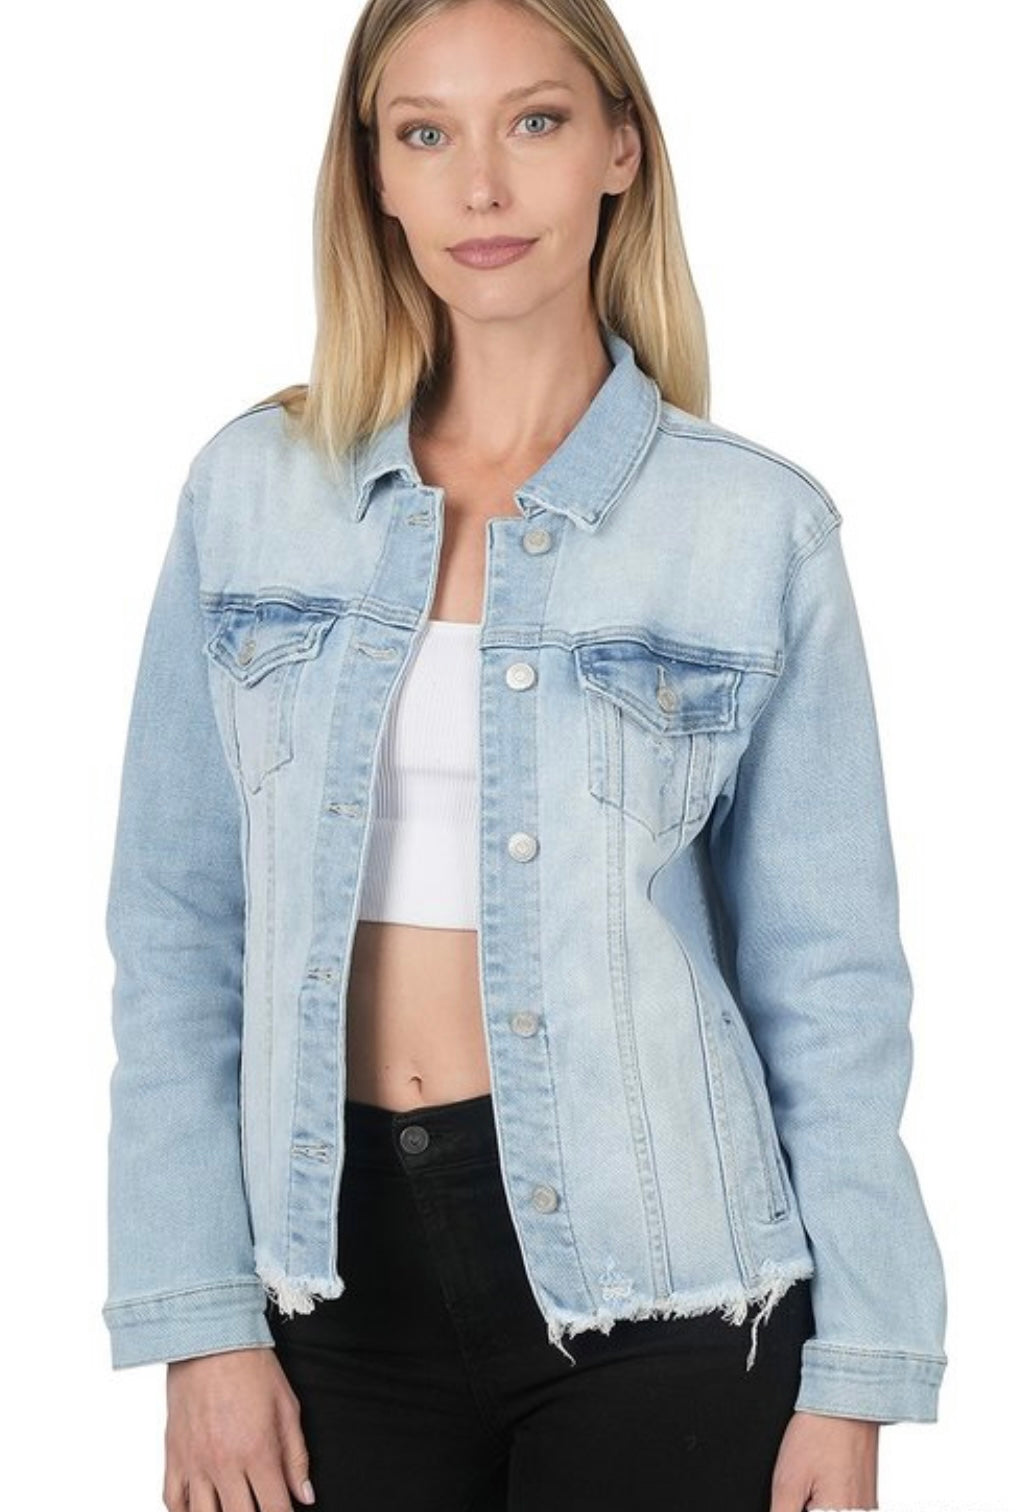 Brayden Light Distressed Denim Jacket - Corinne Boutique Family Owned and Operated USA